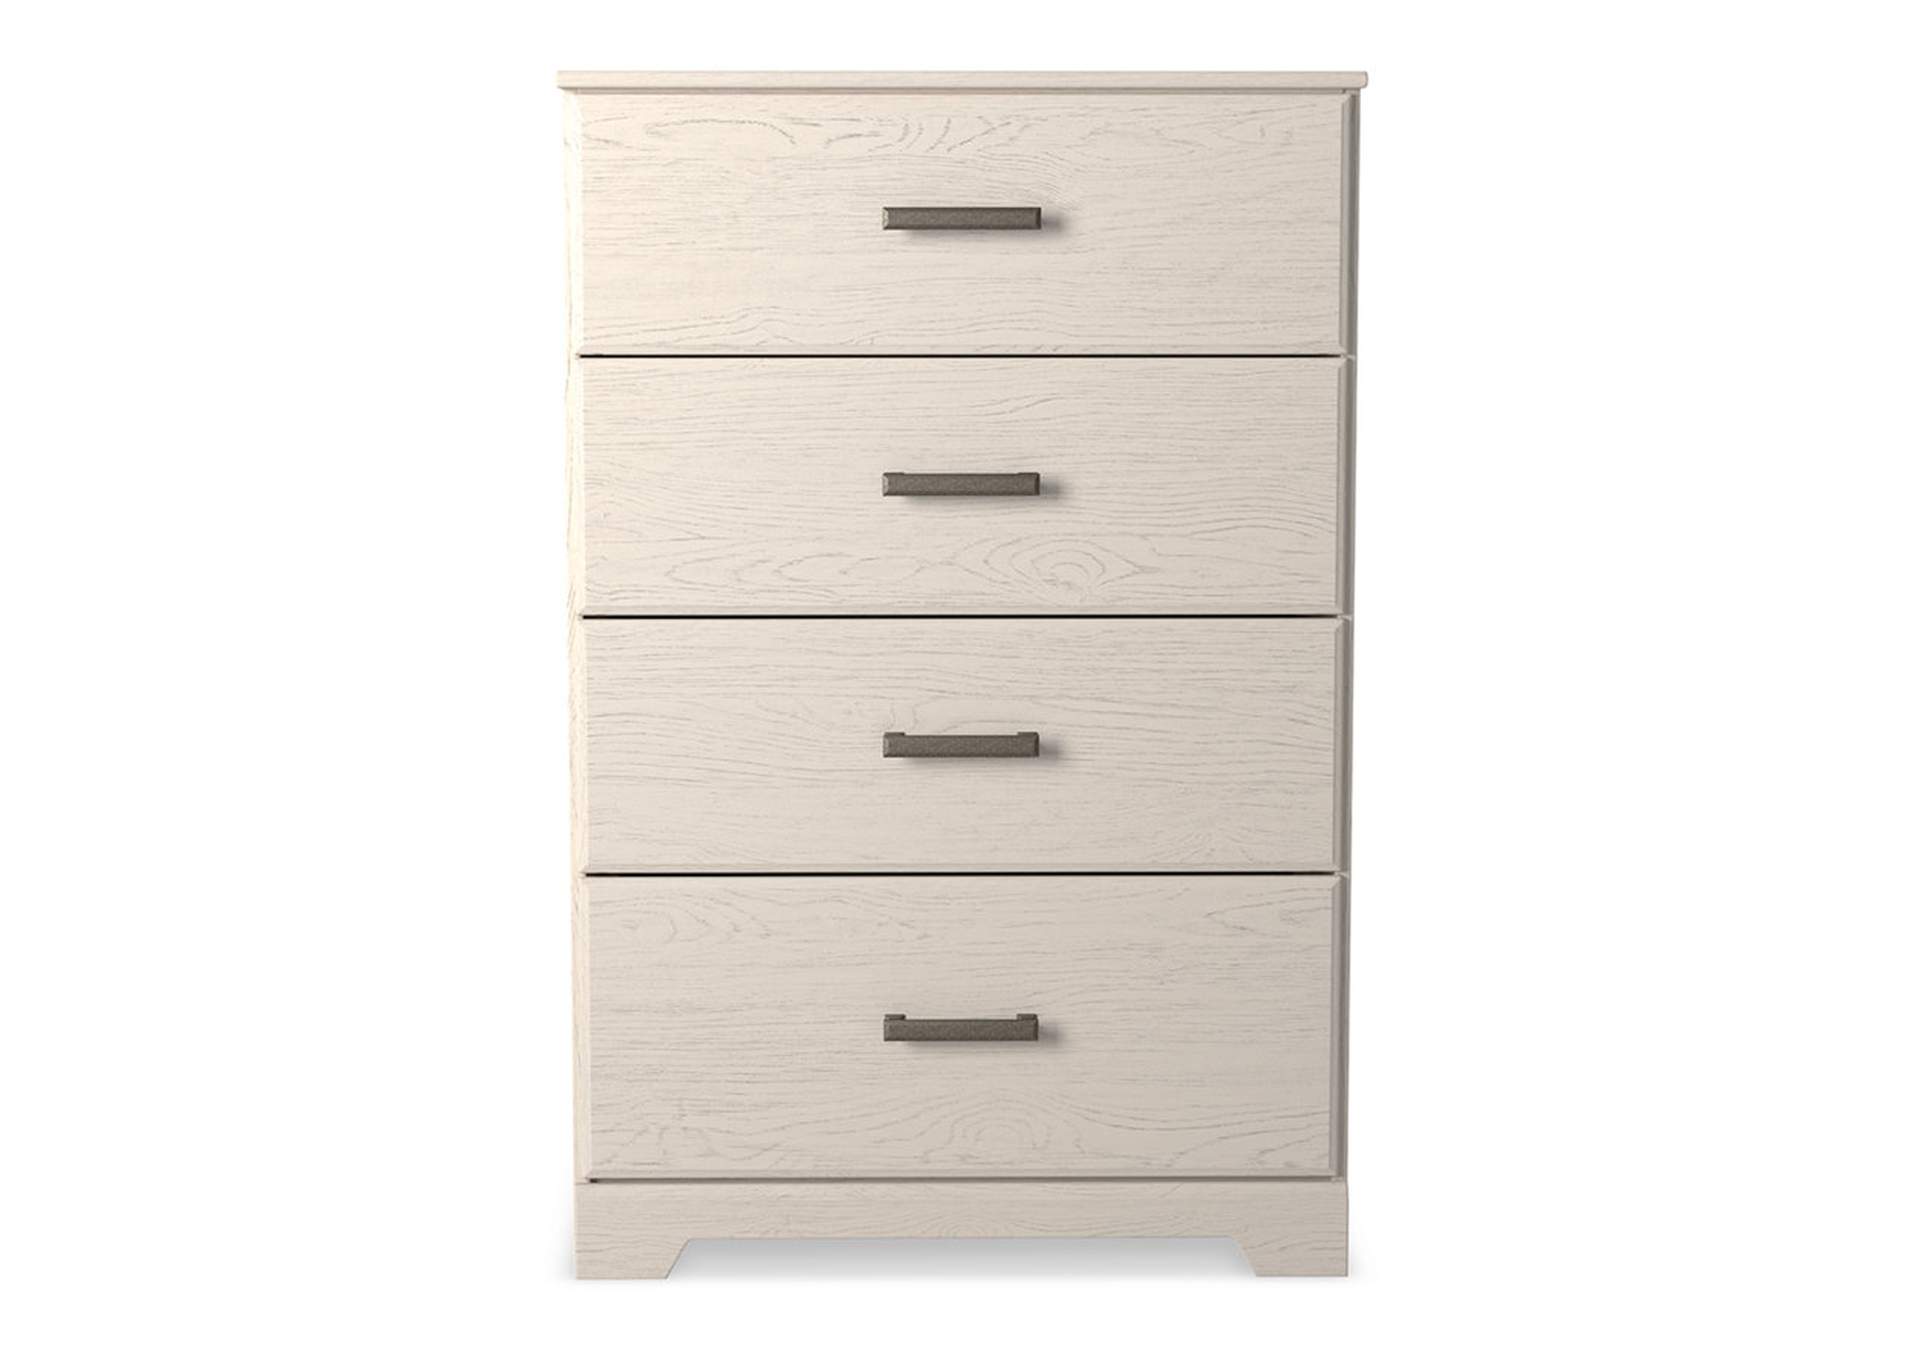 Stelsie Chest of Drawers,Signature Design By Ashley